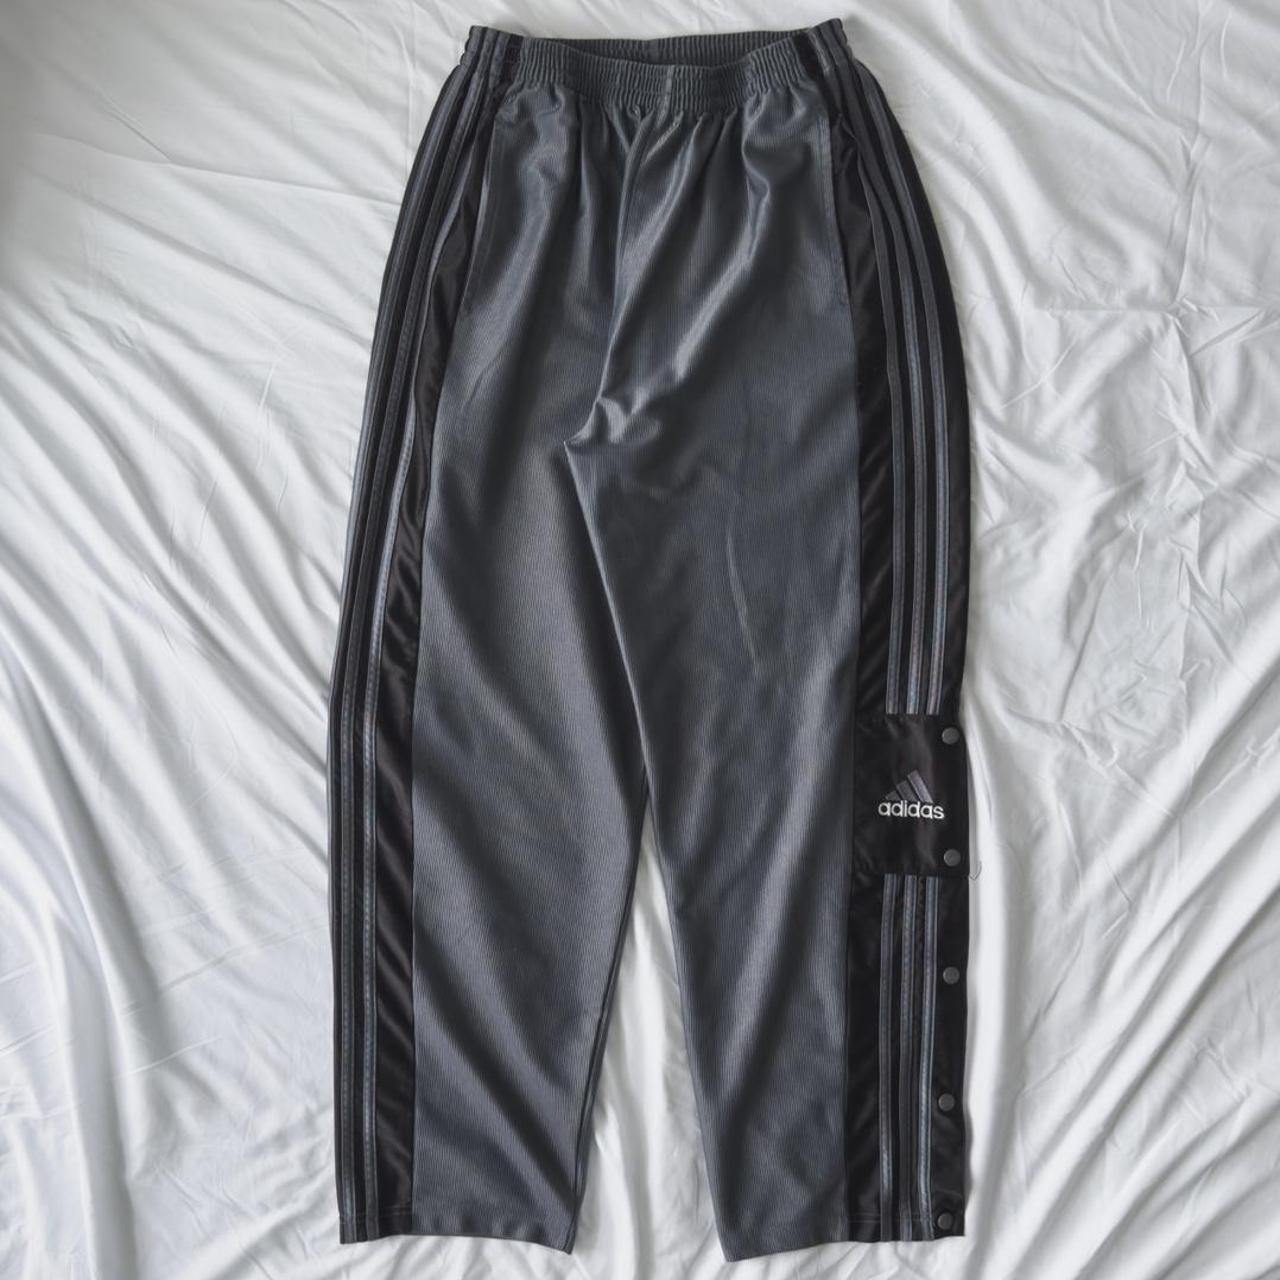 adidas Pants for men - Buy now at Boozt.com